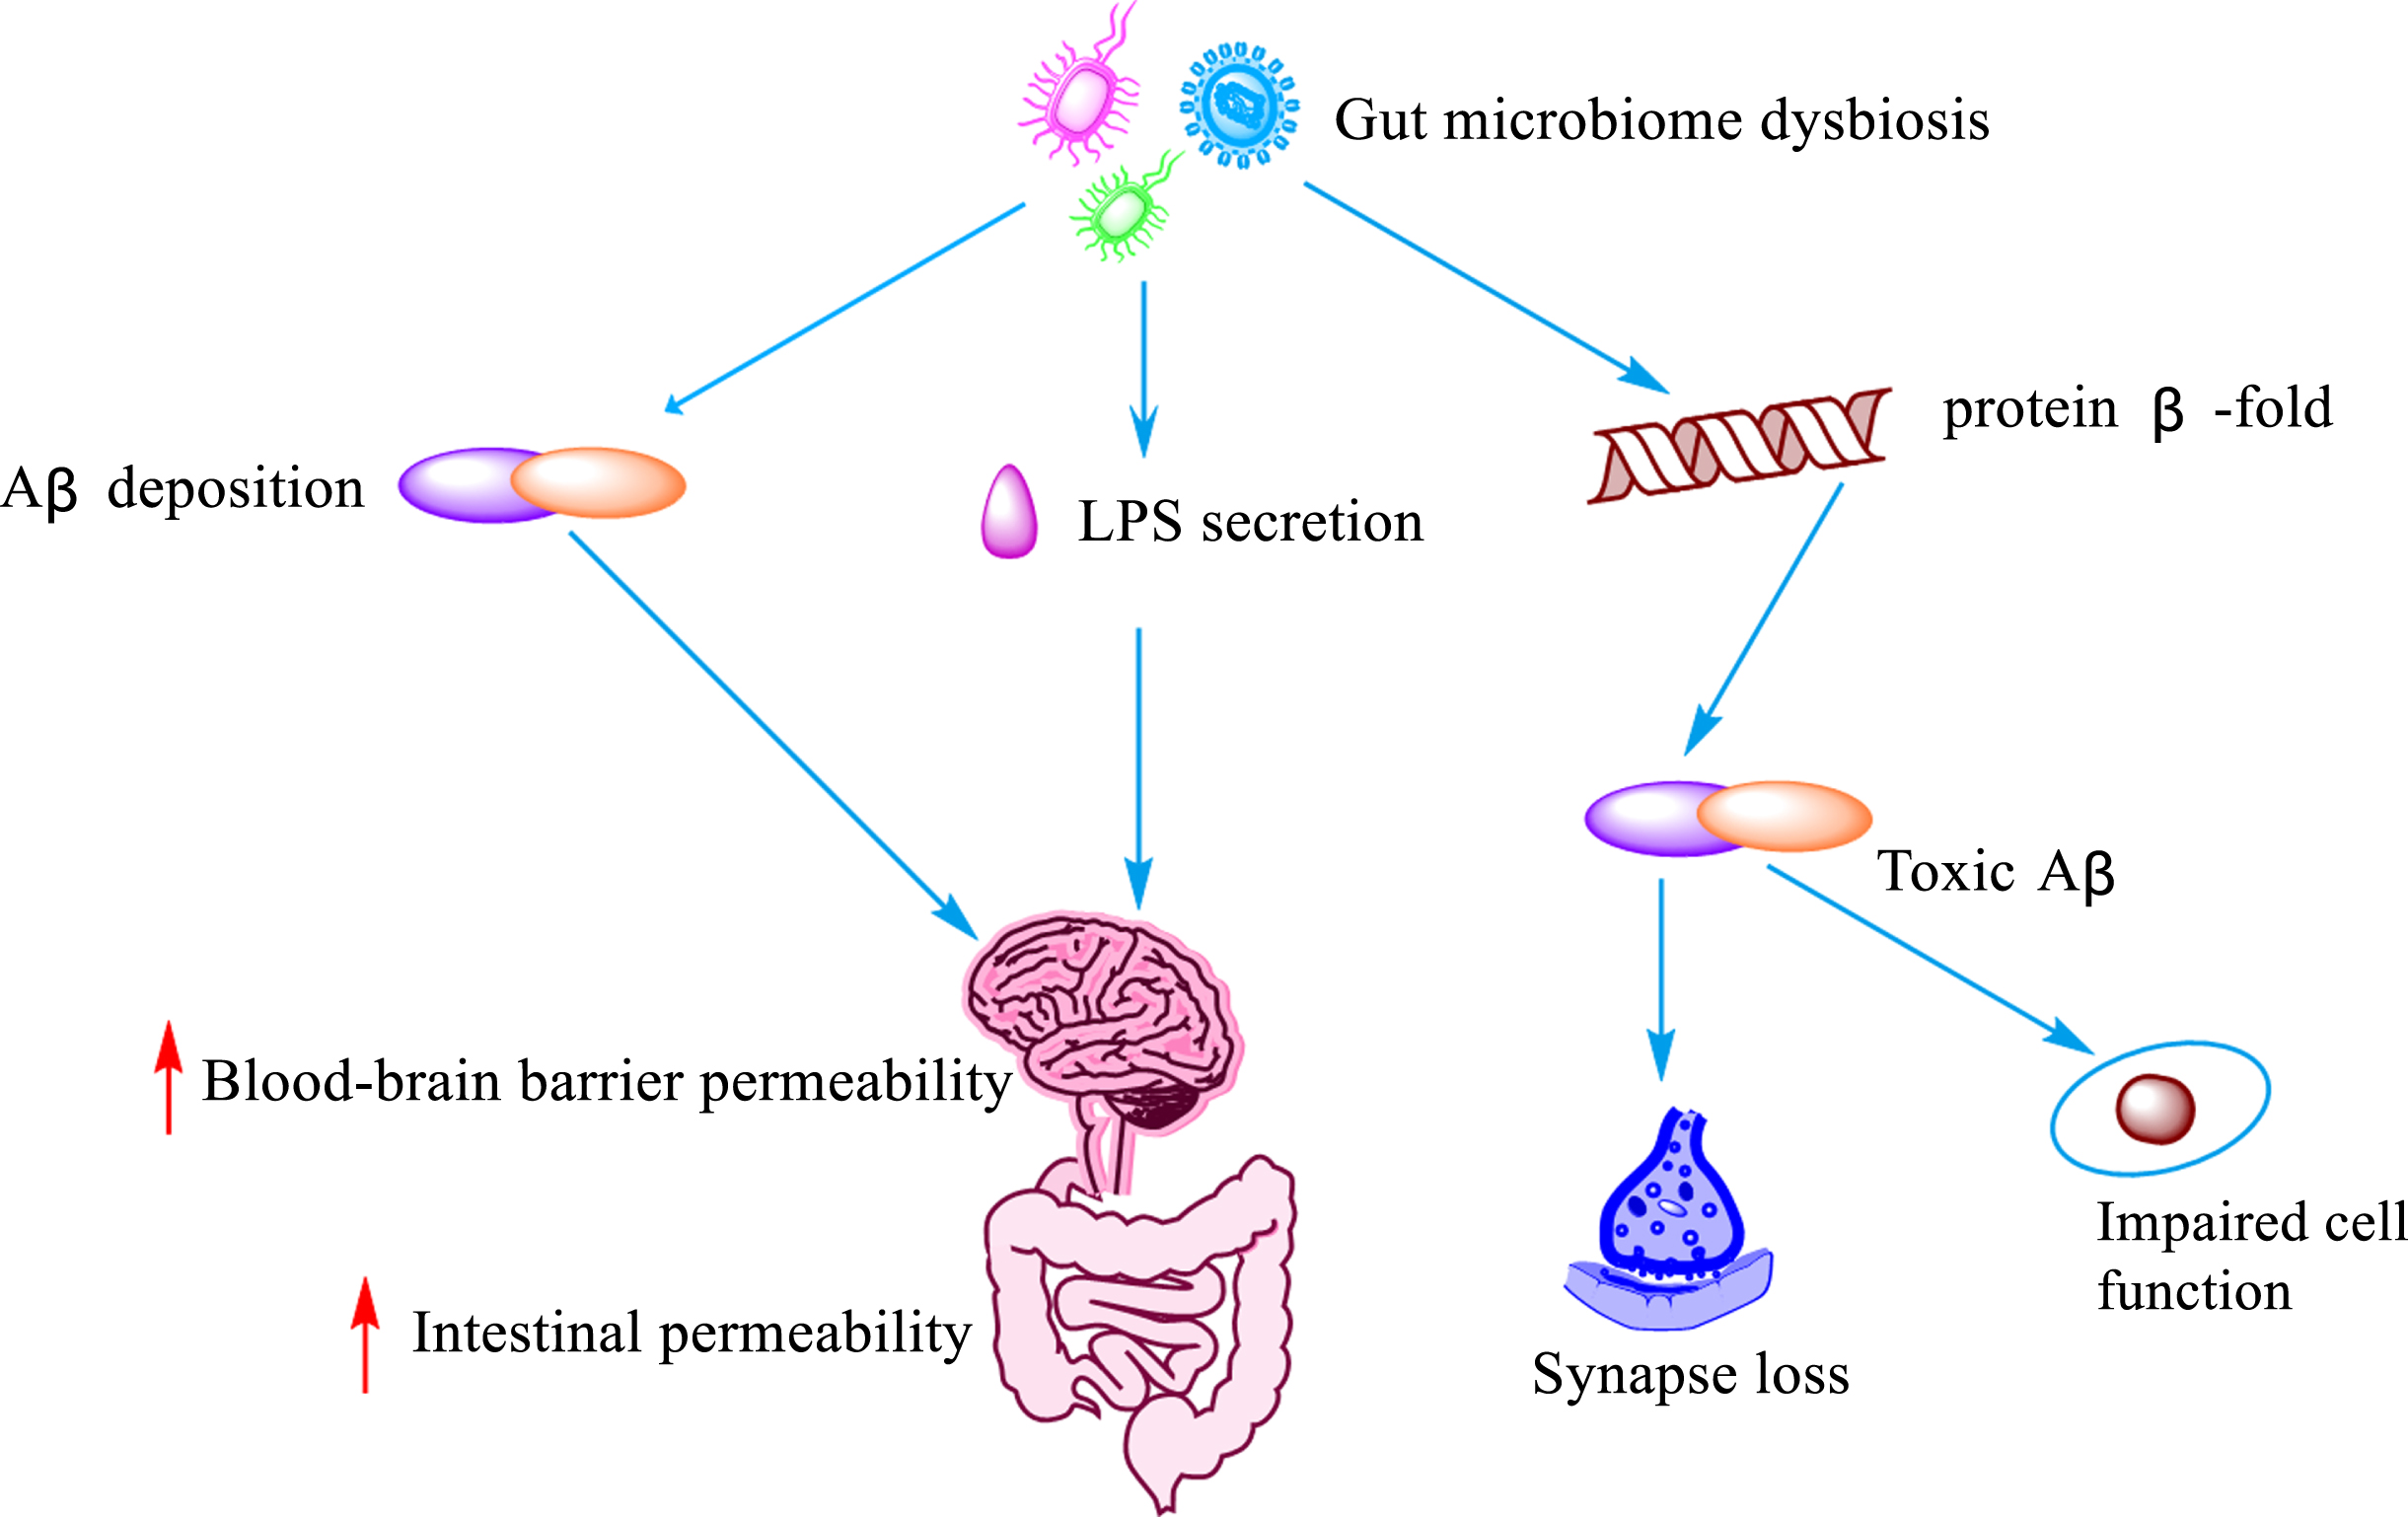 Influence of intestinal flora imbalance on Aβ. Dysregulation of the gut microbiota leads to the deposition of Aβ, LPS secretion, and misfolding of protein β-fold, resulting in increased blood-brain barrier and gut permeability, cellular impairment and loss of synaptic function lose.